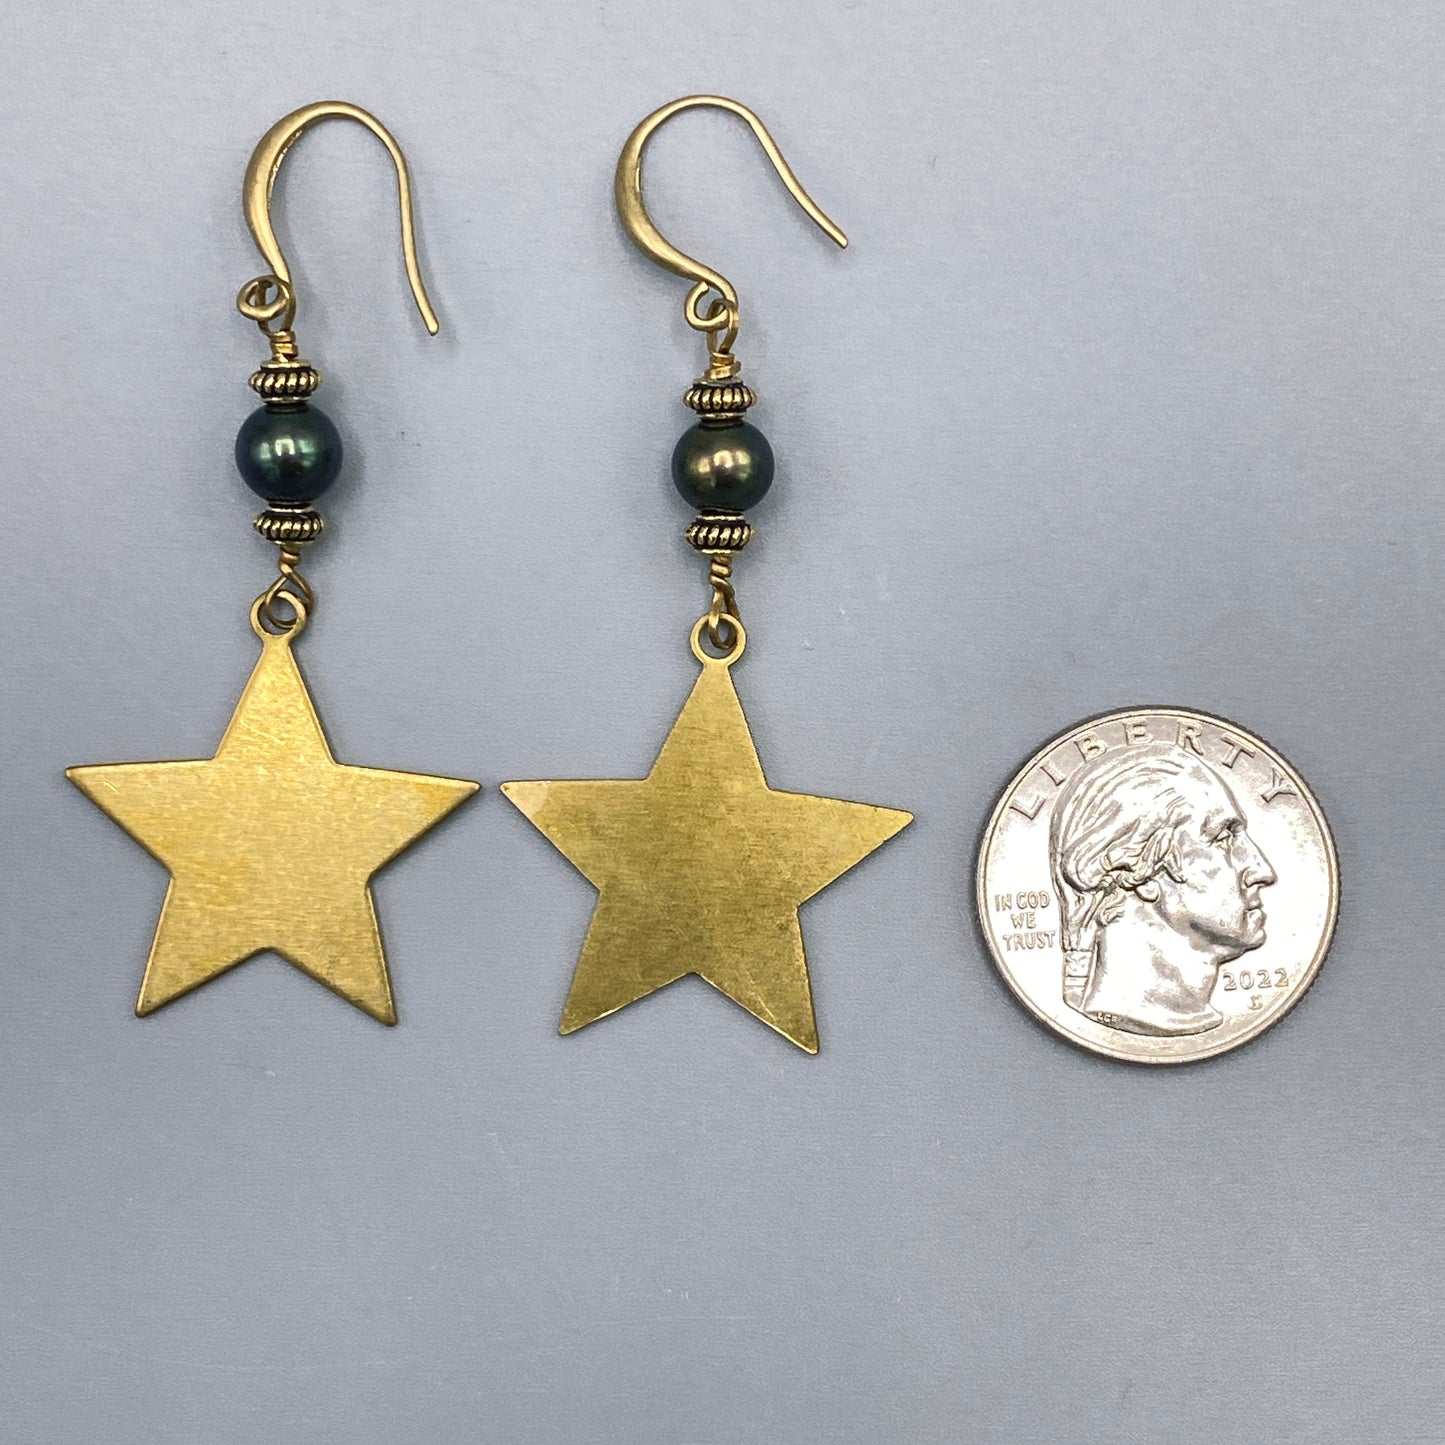 Pearl and Raw Brass Star Earrings